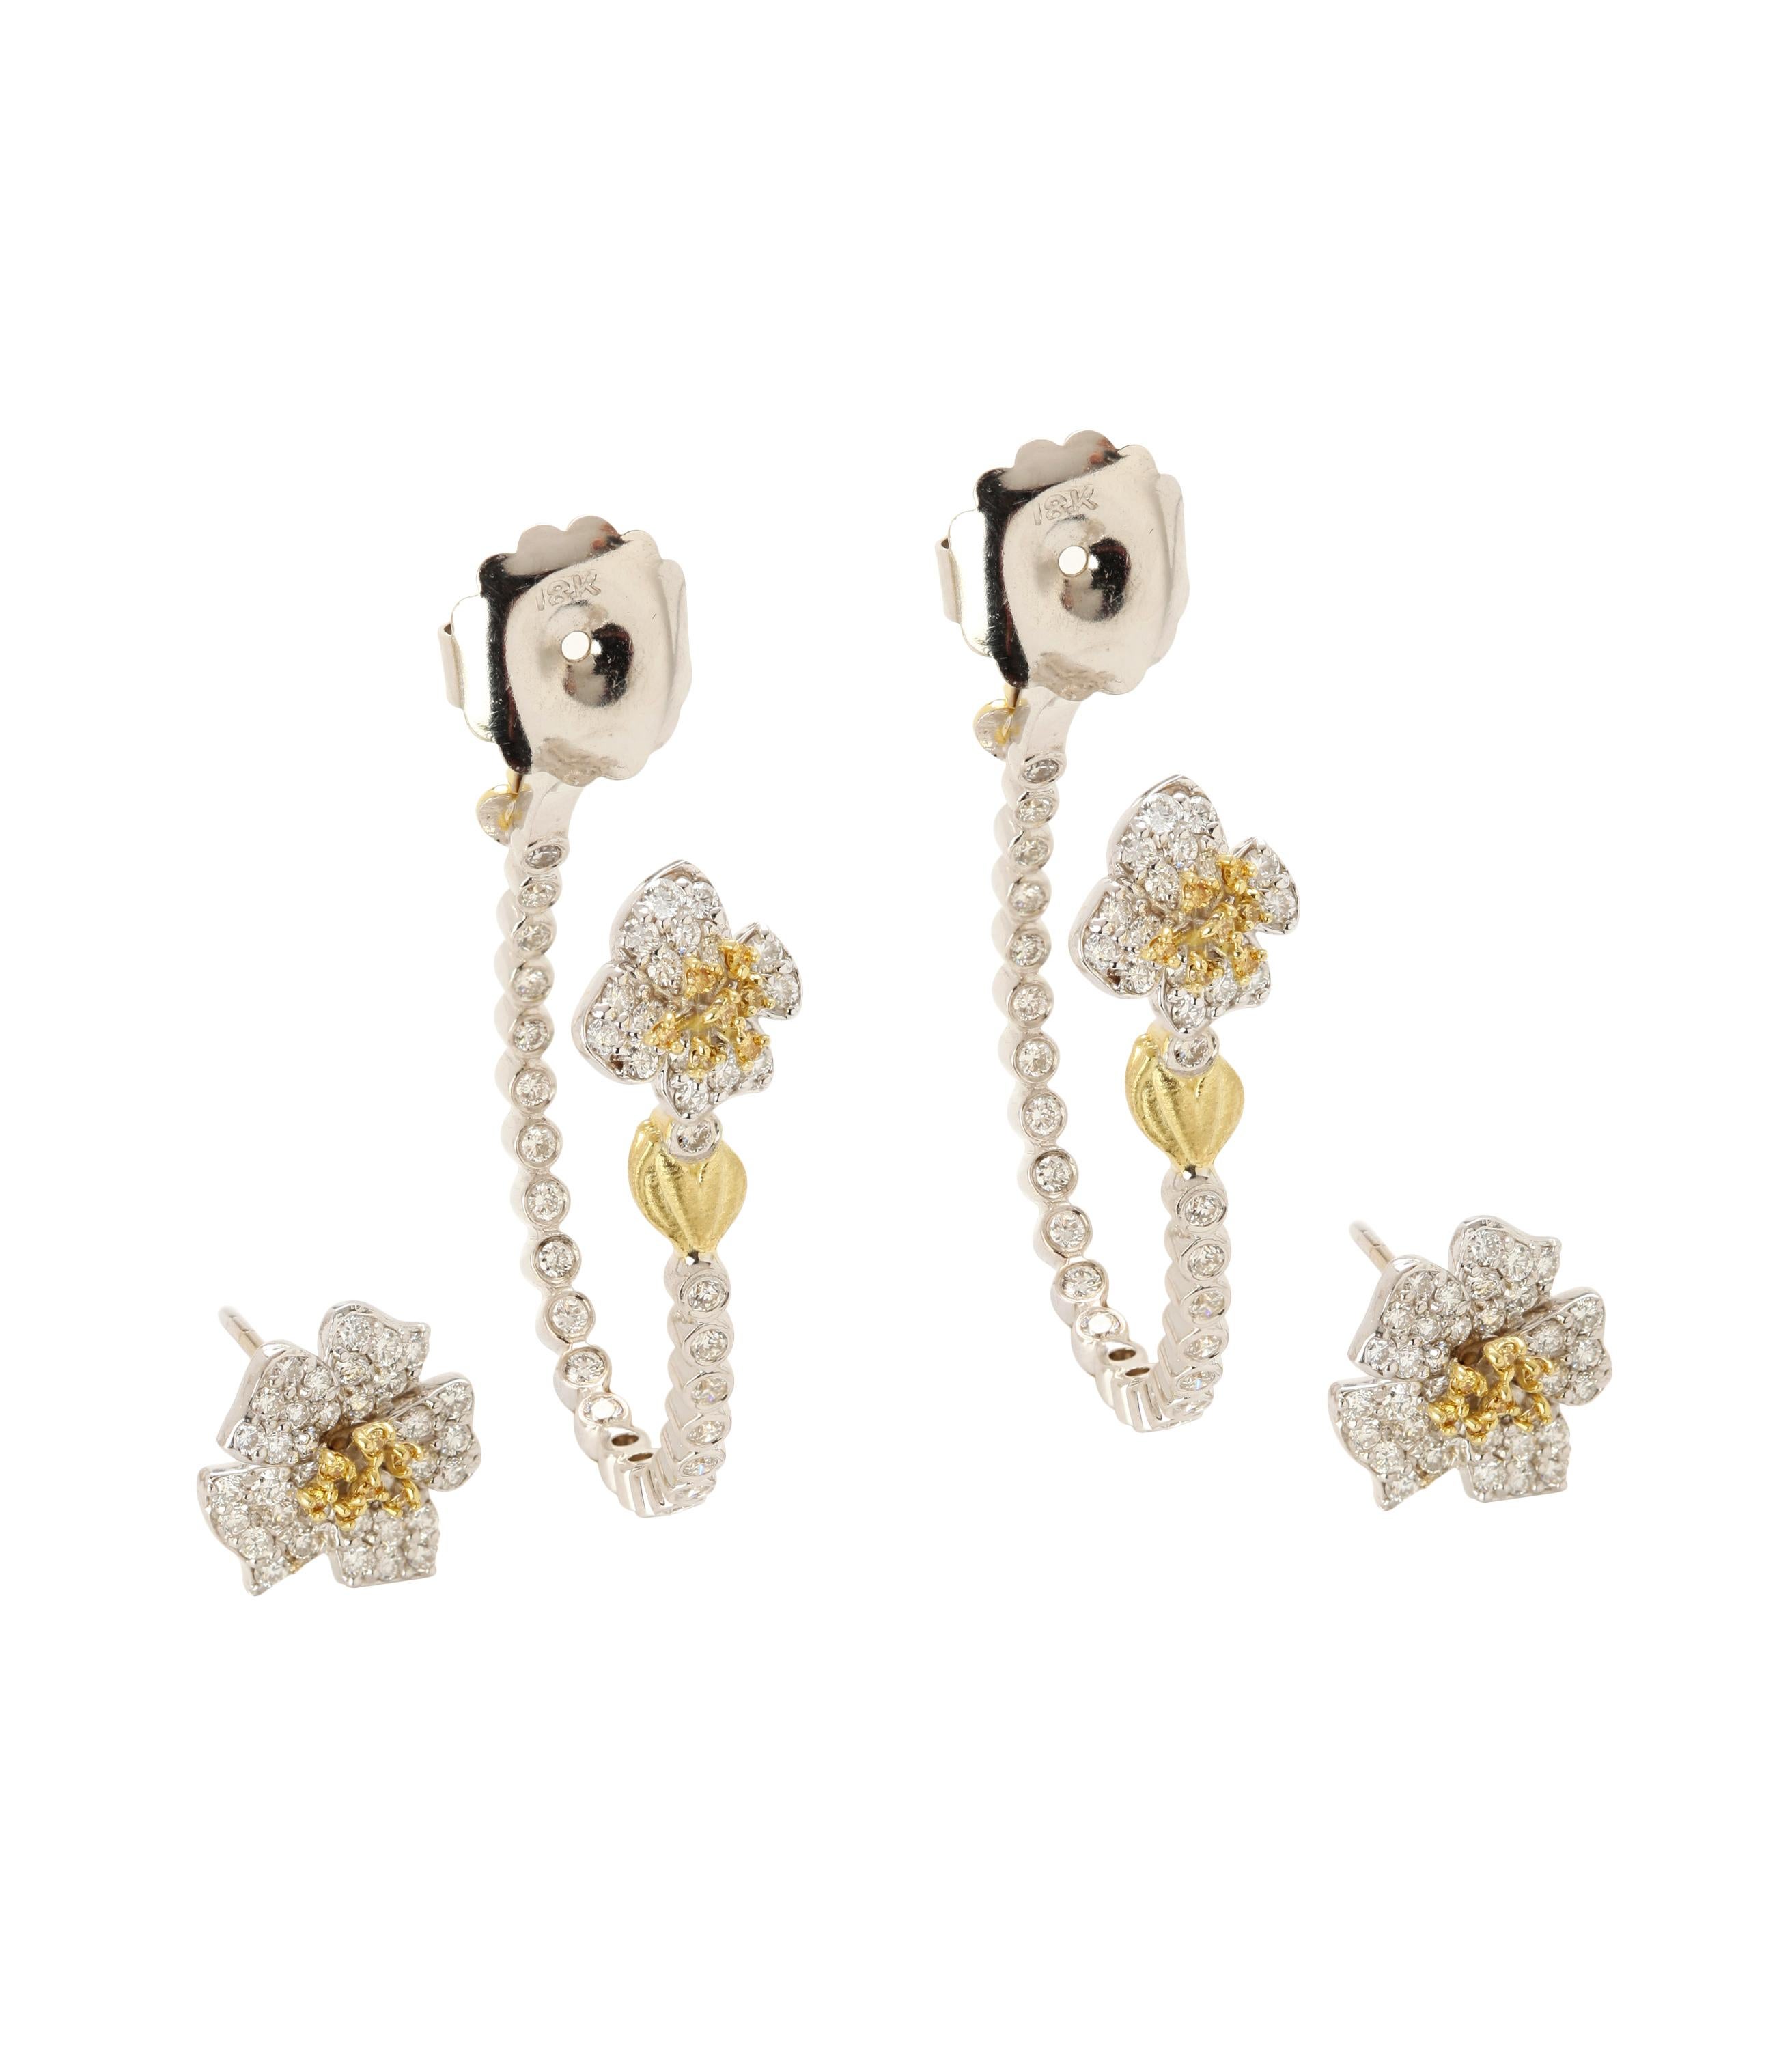 Stambolian 18K White and Yellow Diamonds Floral Two-Piece Hoop Earrings

Earrings are two piece earrings meaning the flower with yellow and white diamonds are worn from front while rest of earrings are worn from back.

1.86ct. G Color, VS Clarity